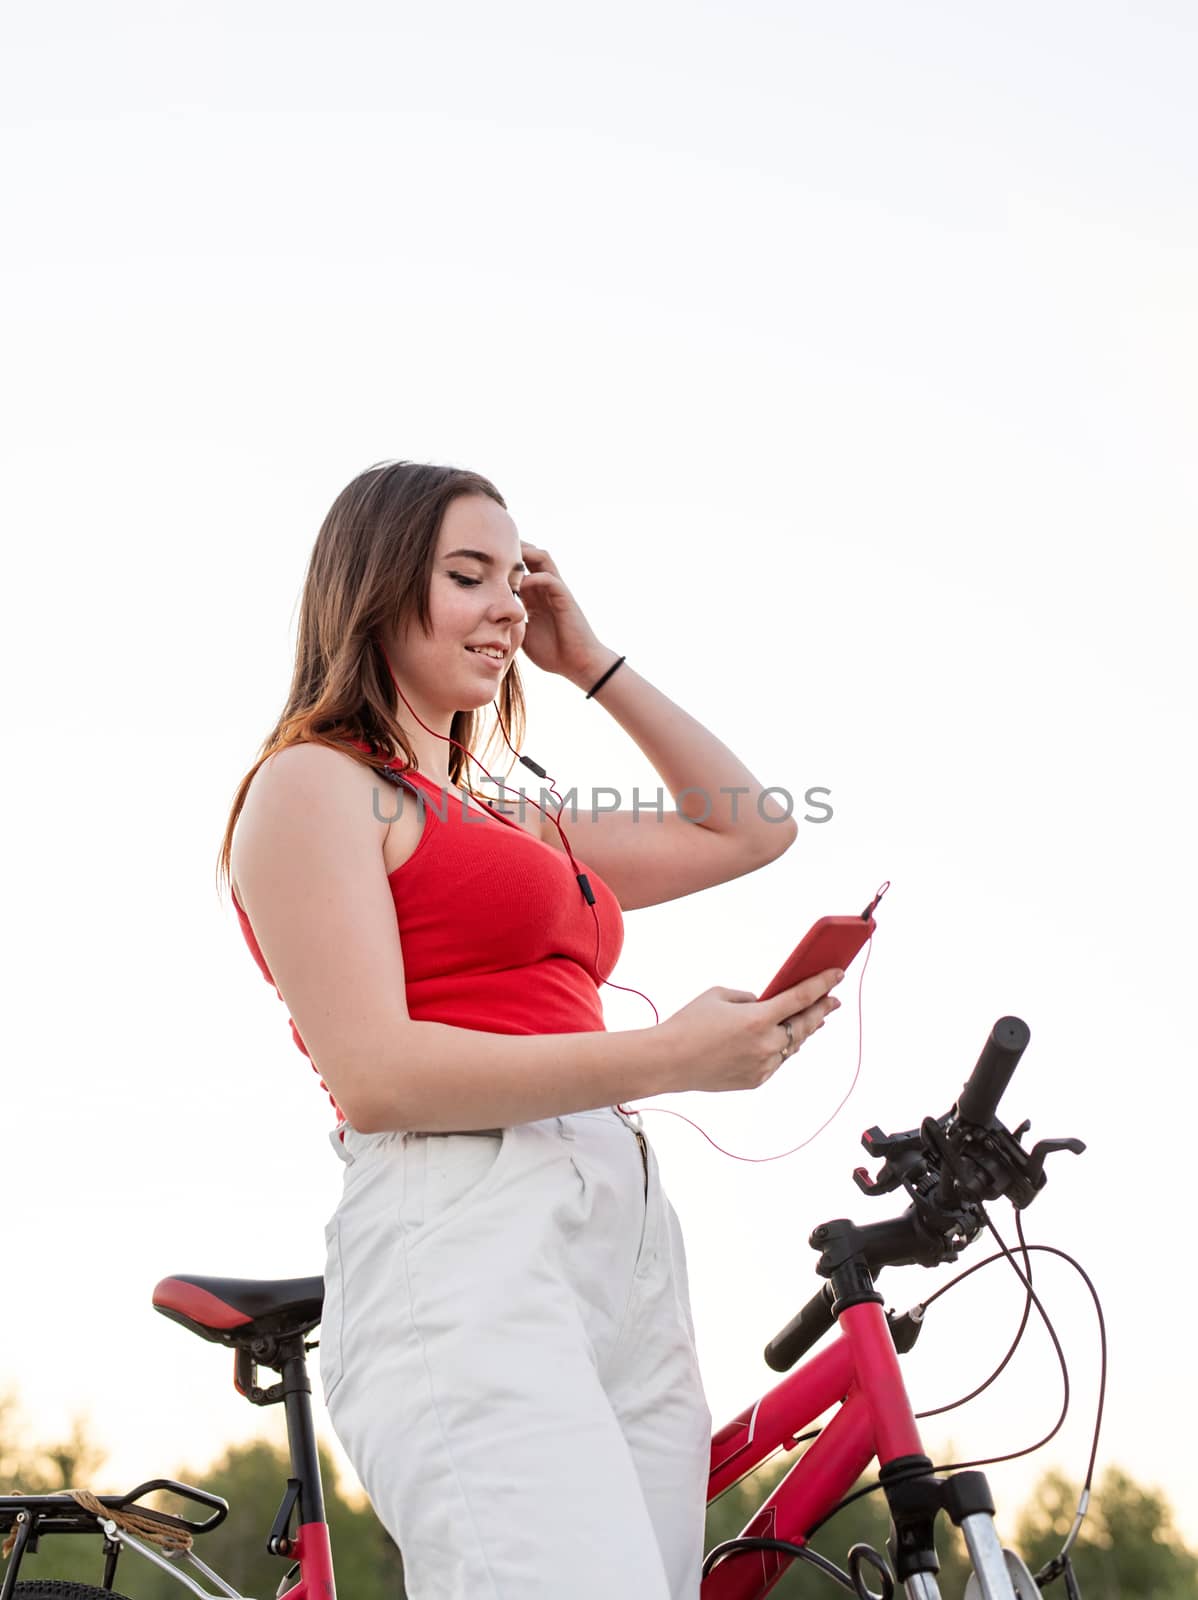 Teenage girl standing next to her bike listening to the music in headphones in the park at sunset. Active lifestyle